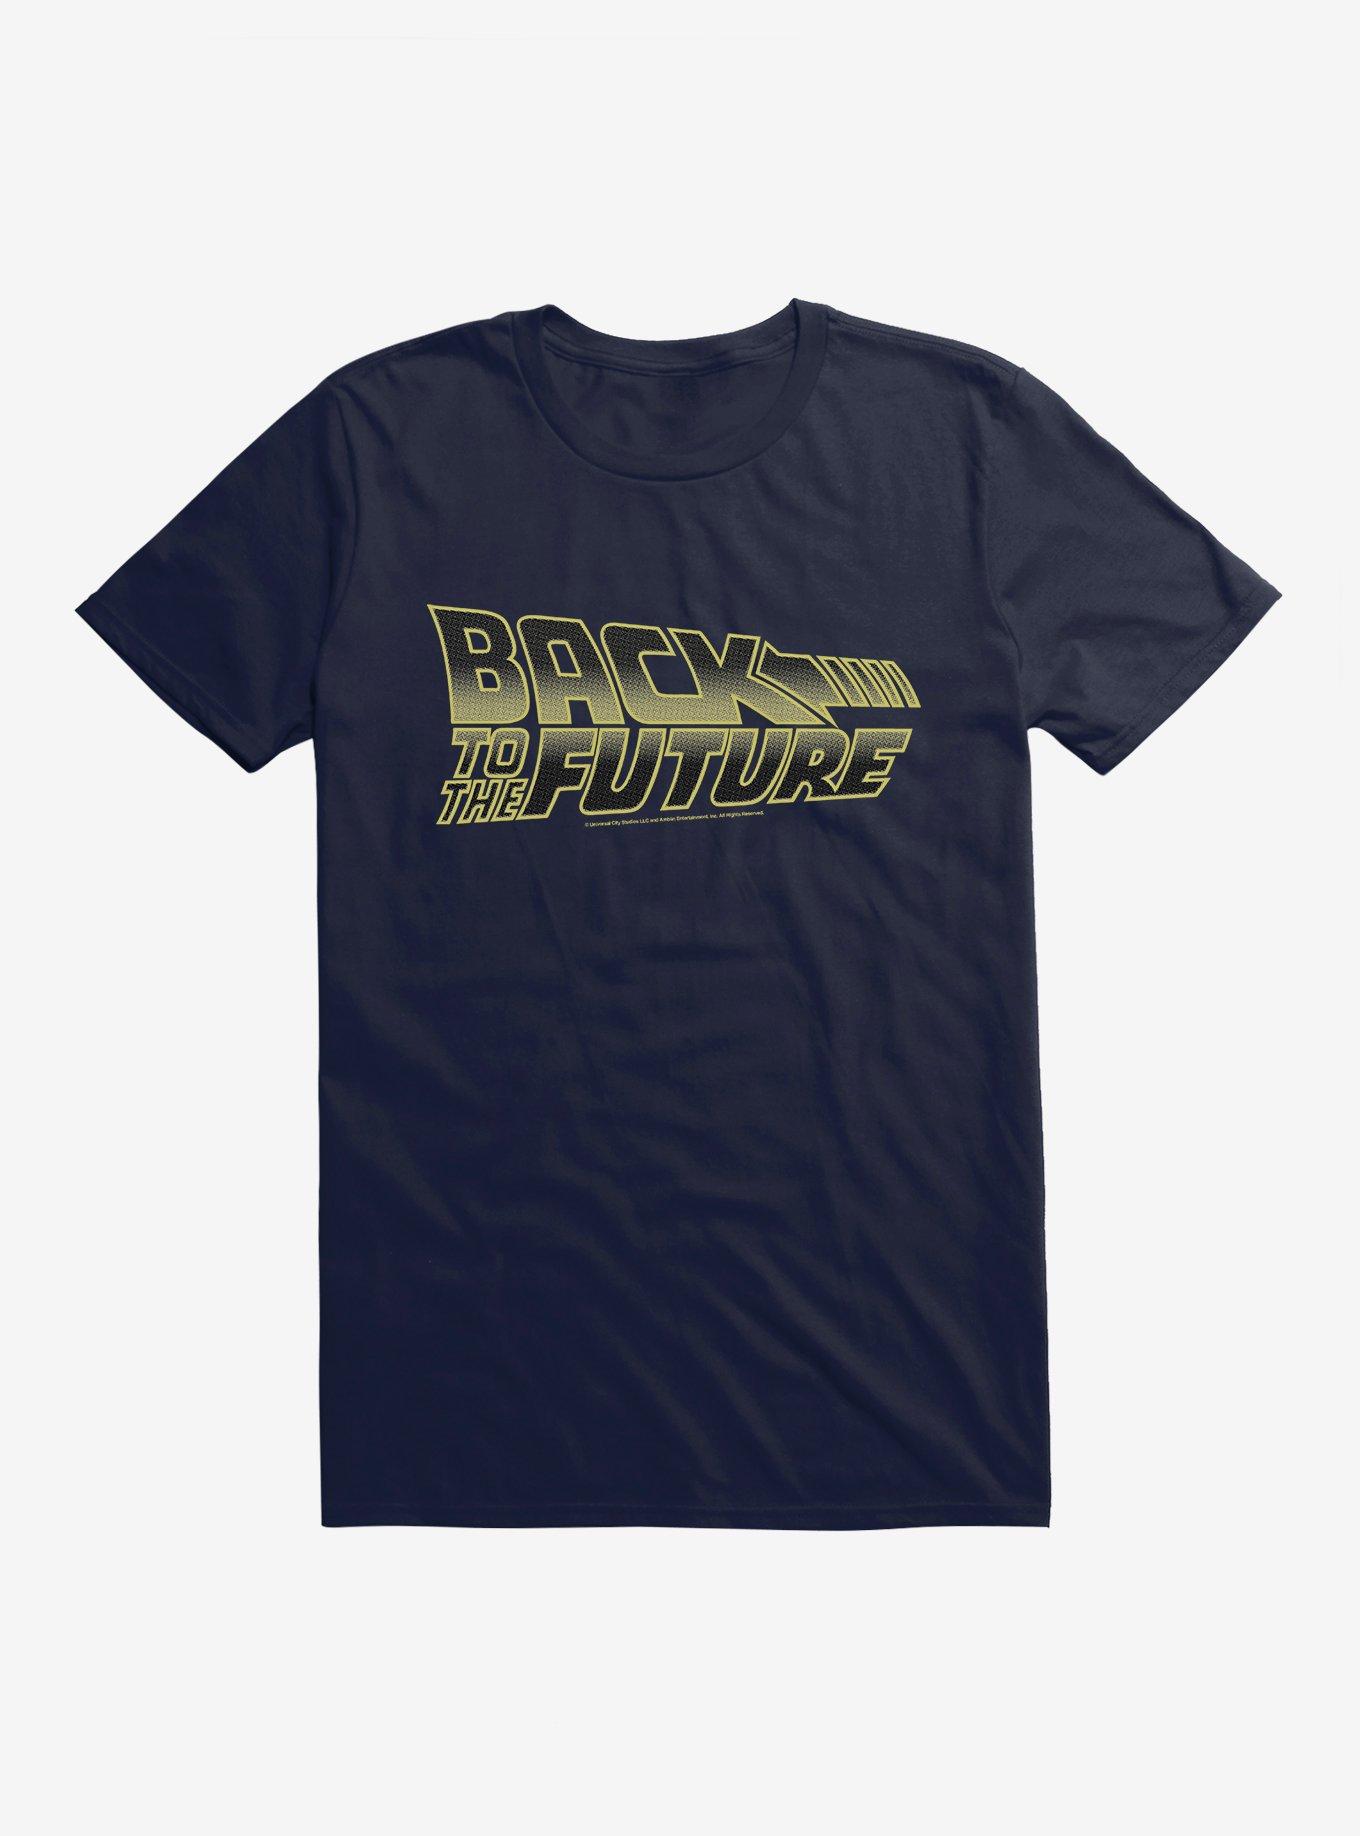 Back To The Future Bold Yellow Script T-Shirt, NAVY, hi-res